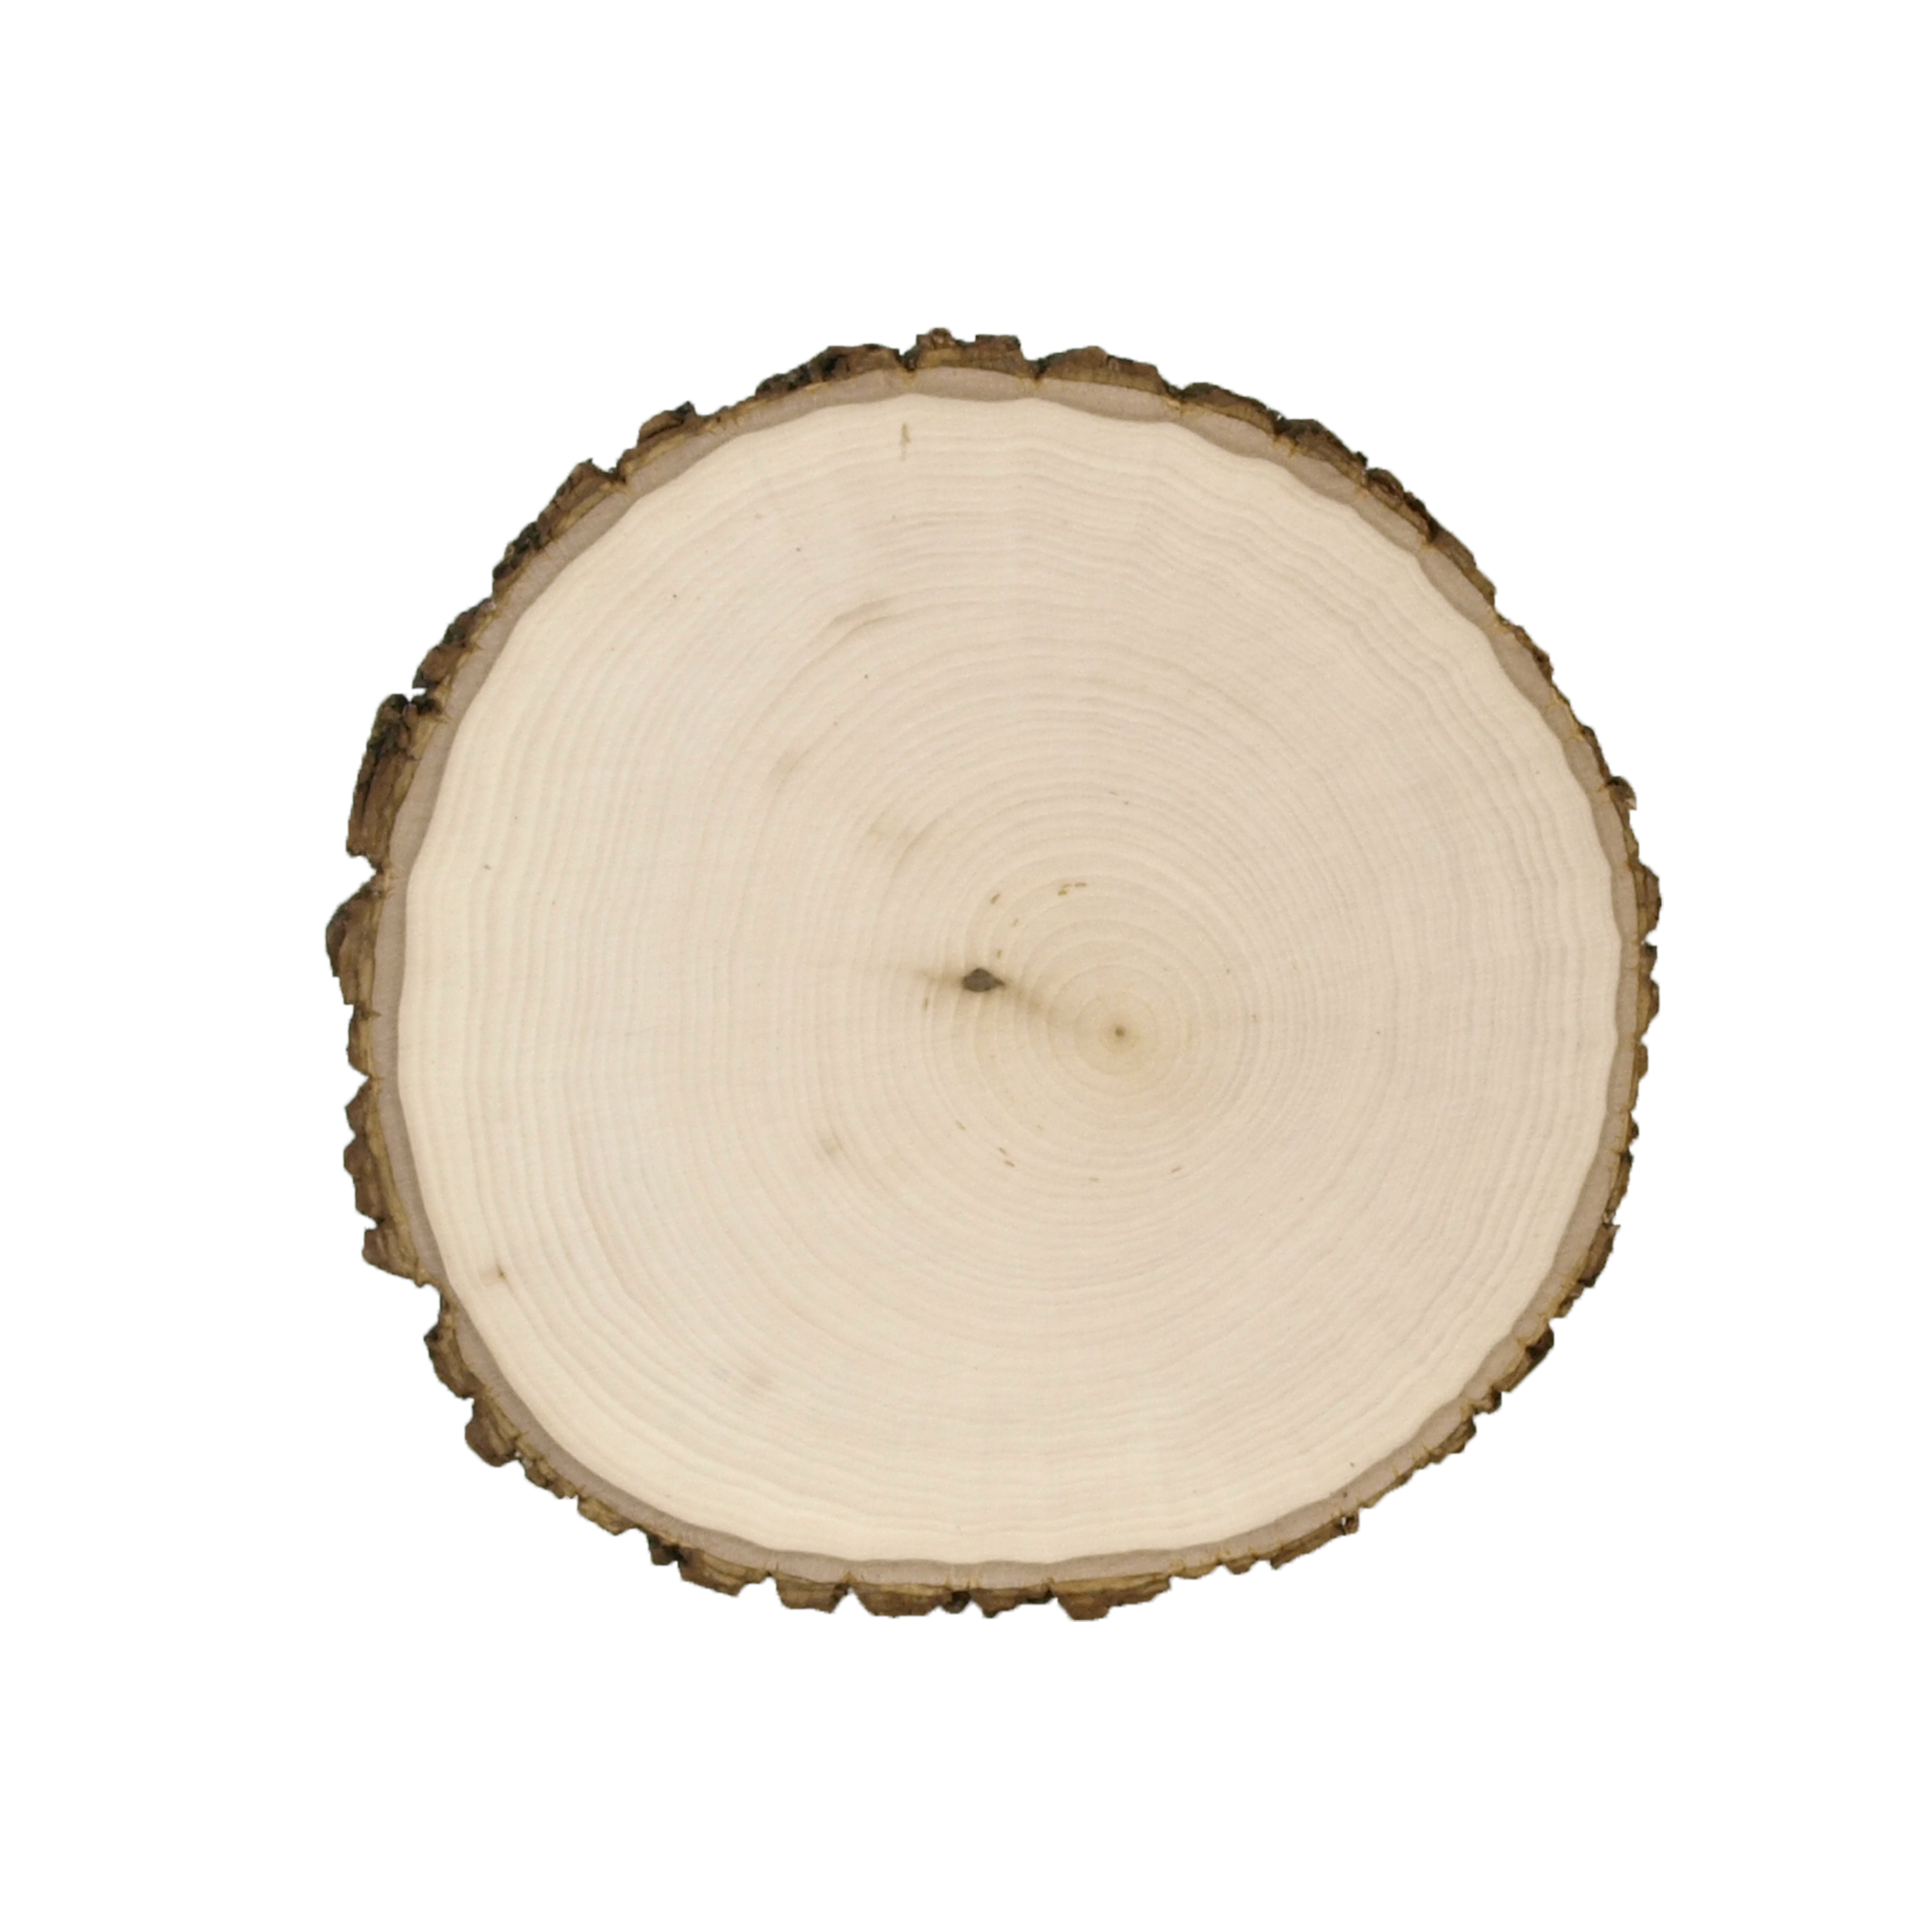 Basswood Country Round Plaque 11